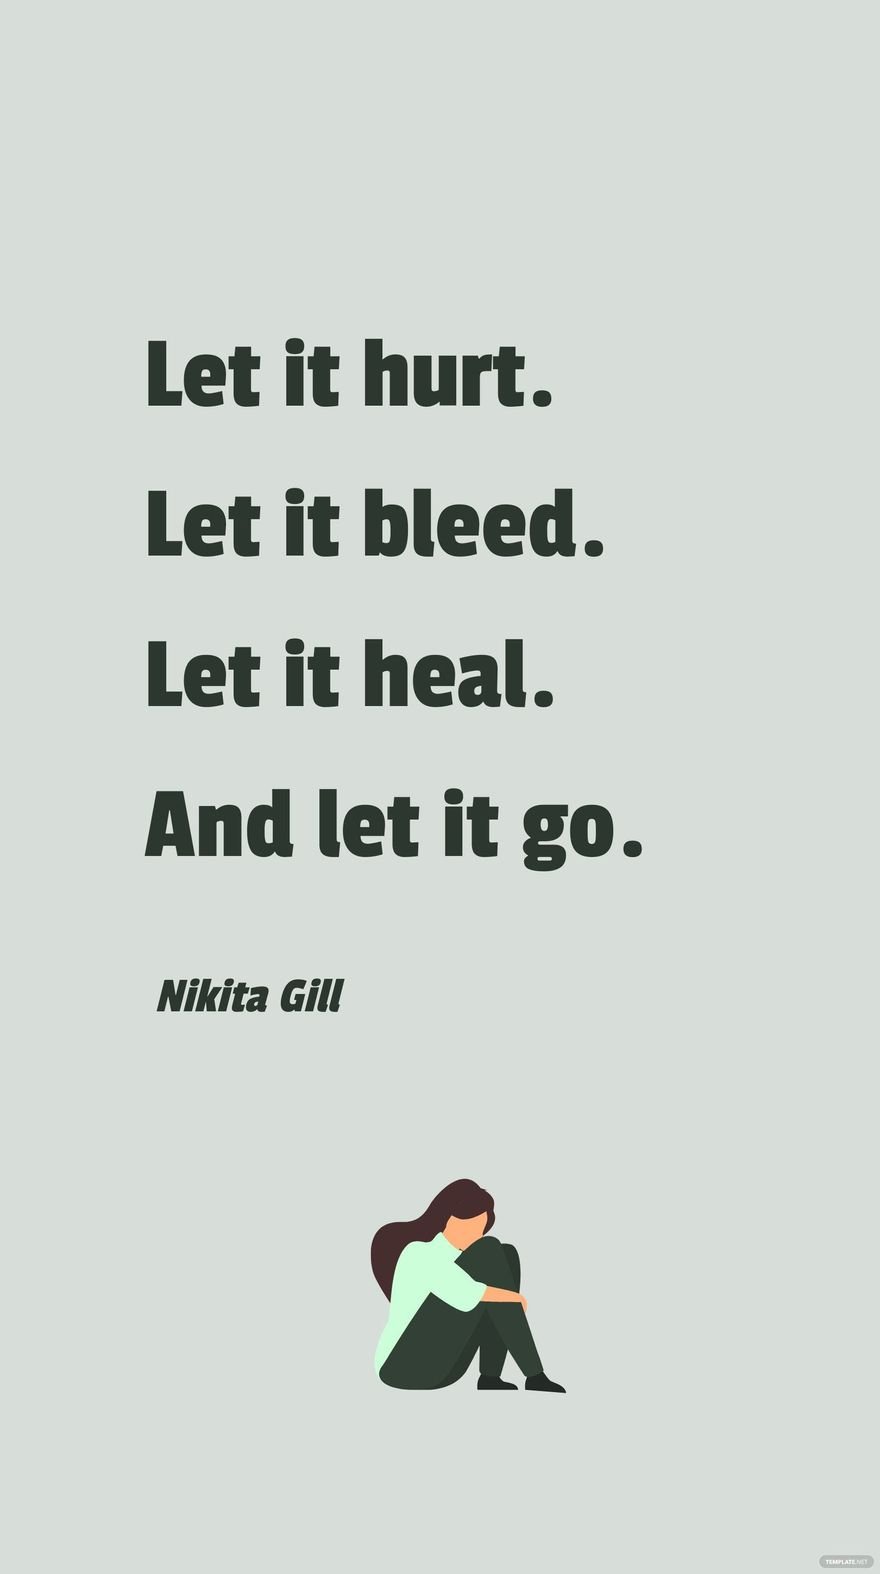 Nikita Gill - Let it hurt. Let it bleed. Let it heal. And let it go.